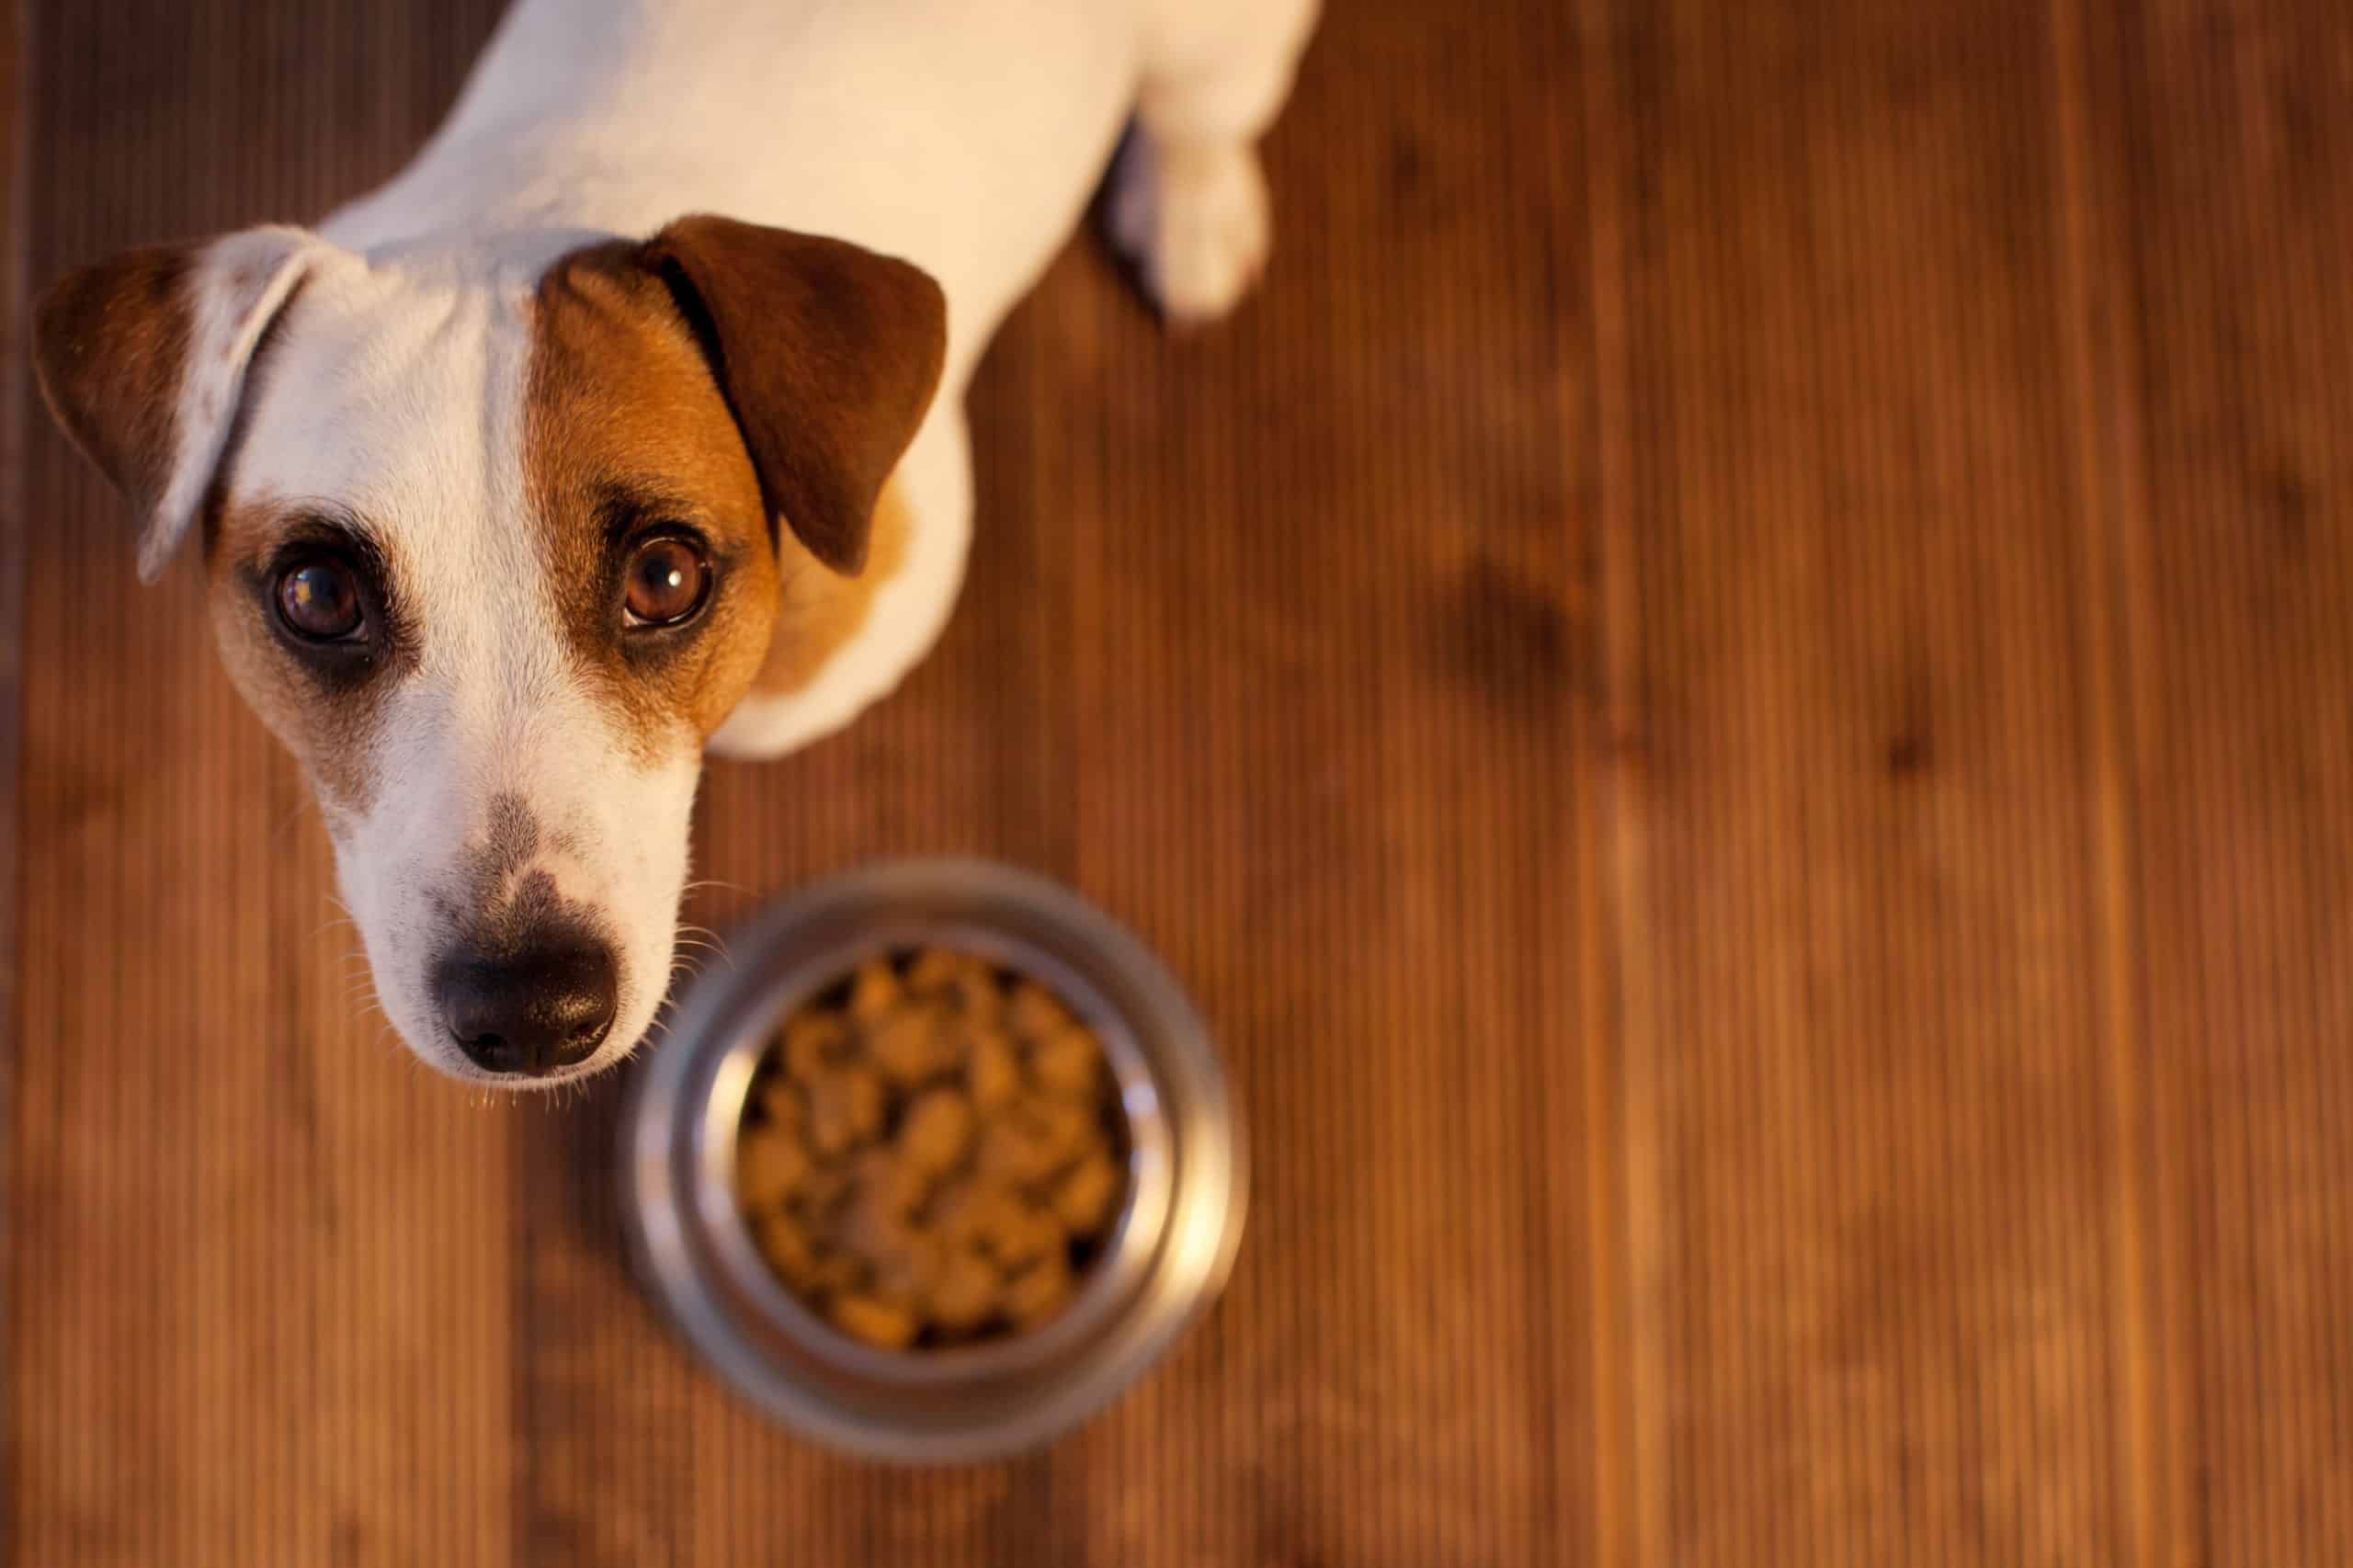 Is it ok to change flavors of dog food?